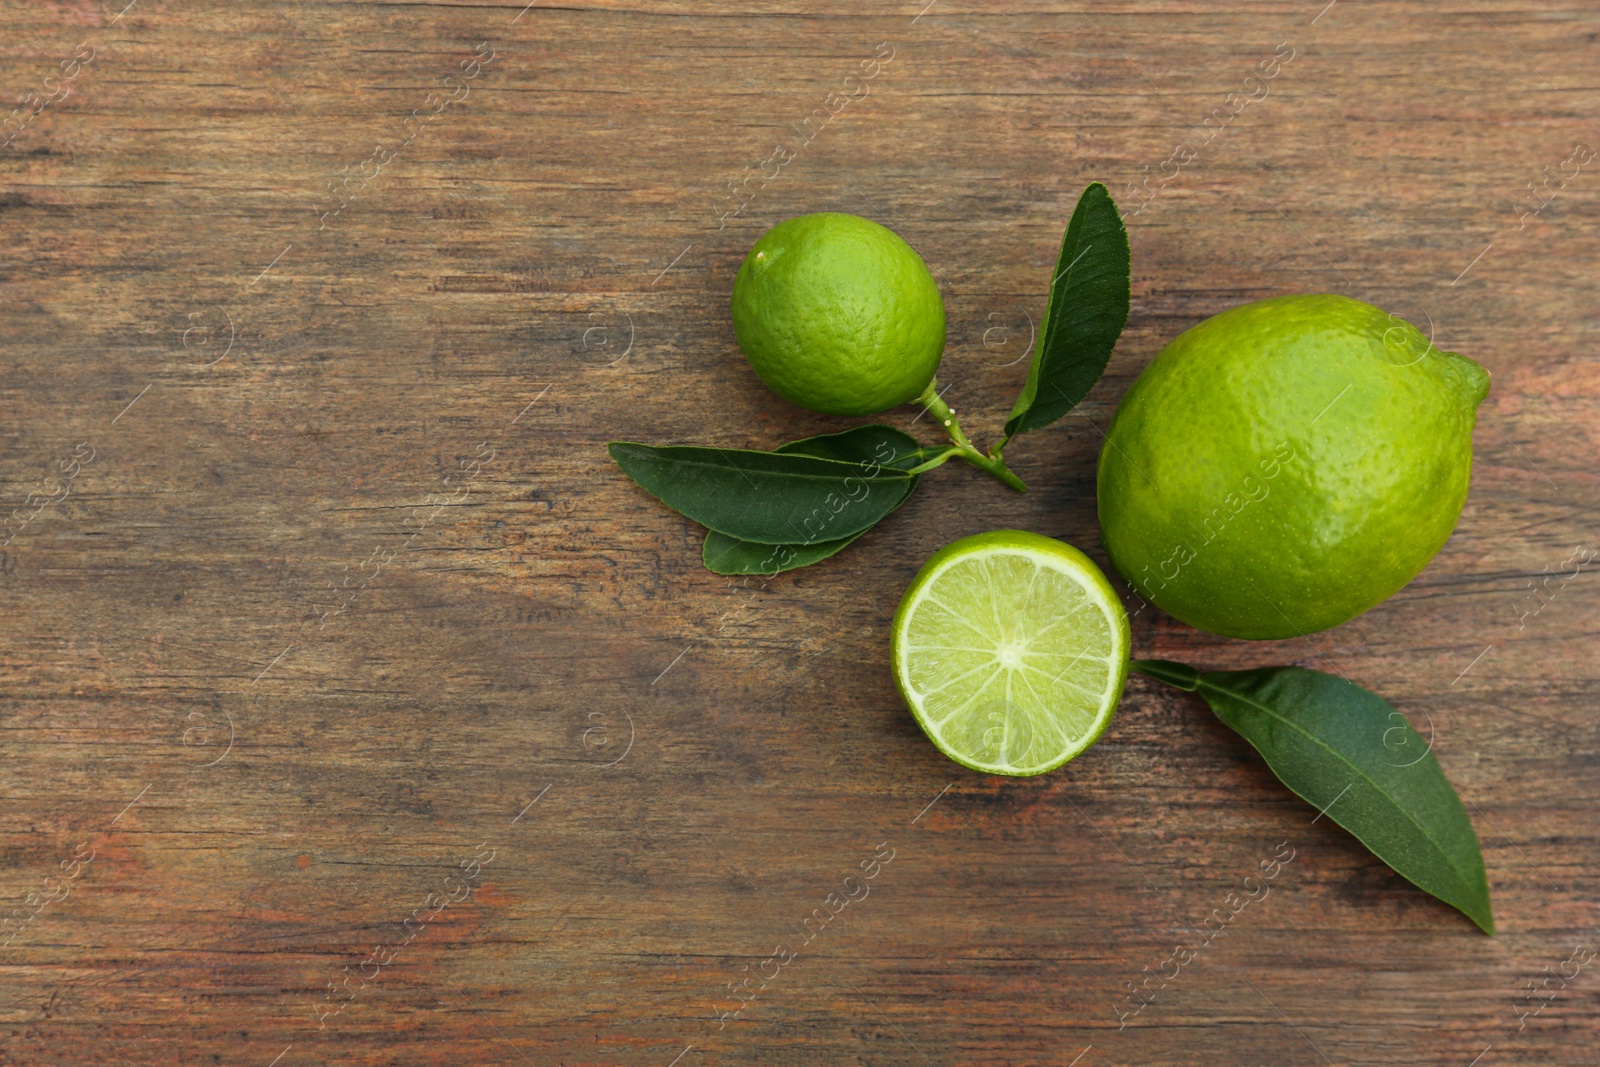 Photo of Whole and cut fresh ripe limes with green leaves on wooden table, flat lay. Space for text